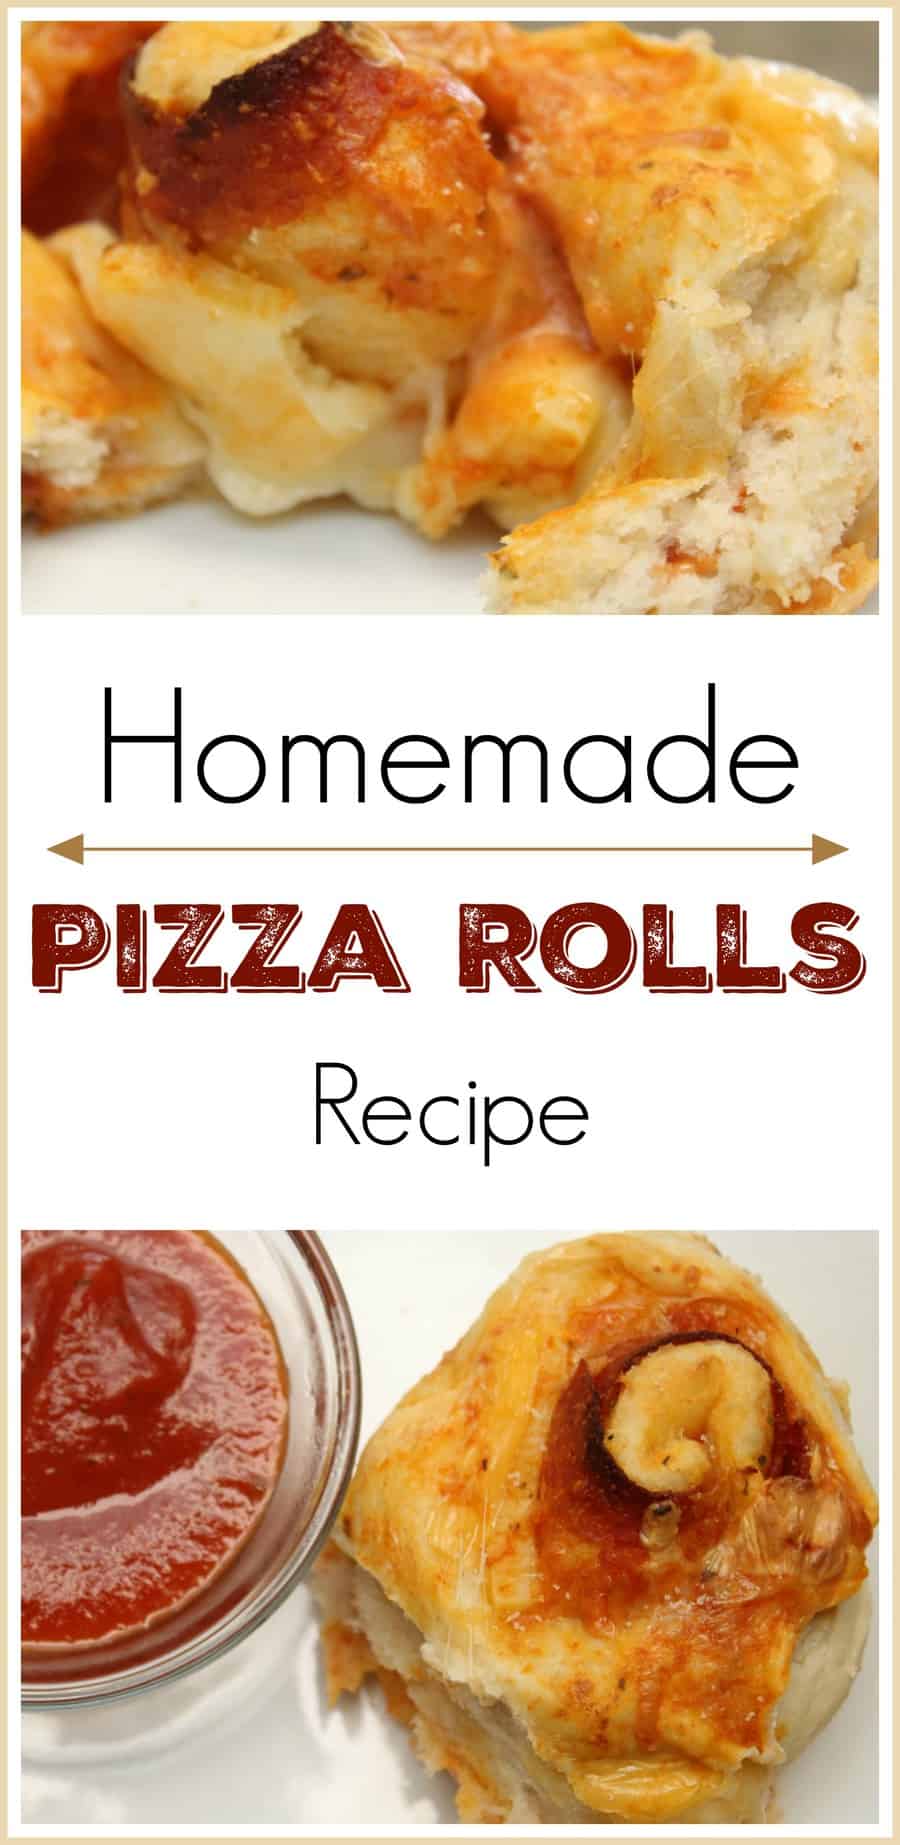 Homemade Pizza Rolls ~ Great Snack Or Delicious Lunch!